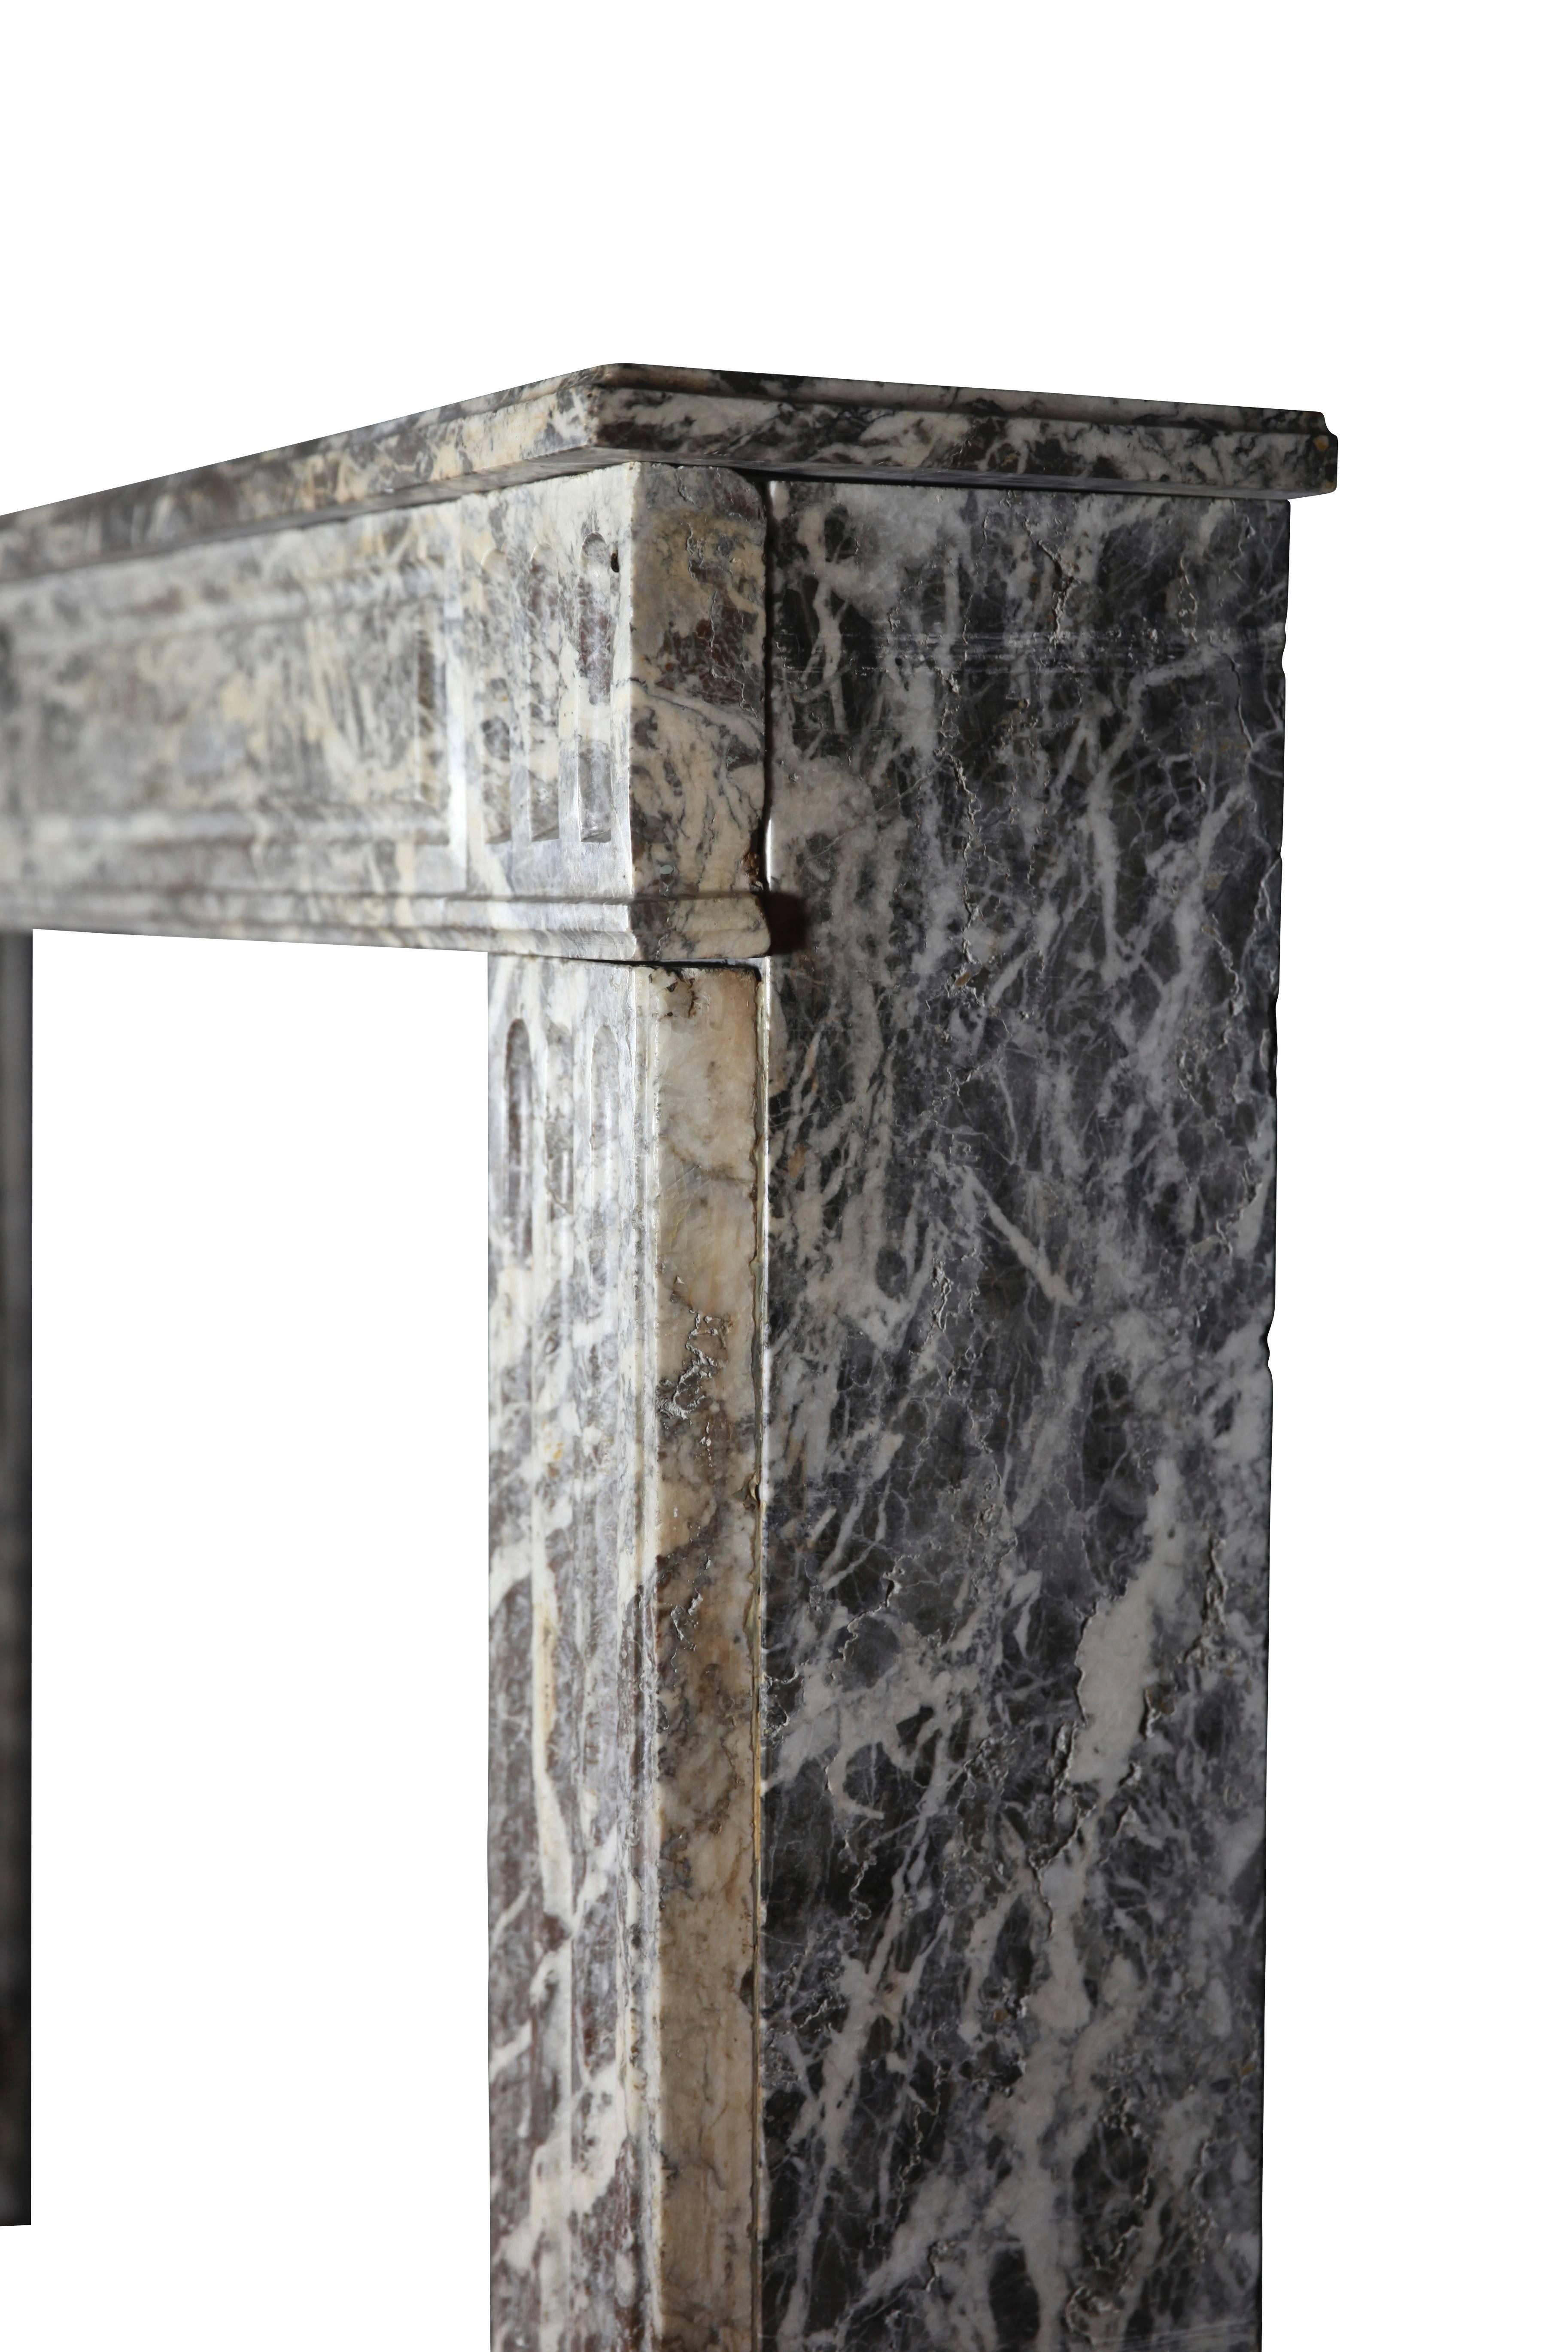 This antique fireplace mantle is in superb condition. Its elegant white grey marble comes from the Belgian Ardennes region; this particular type of marble has been used in many landmark buildings.
Perfect for a classic eclectic interior design.